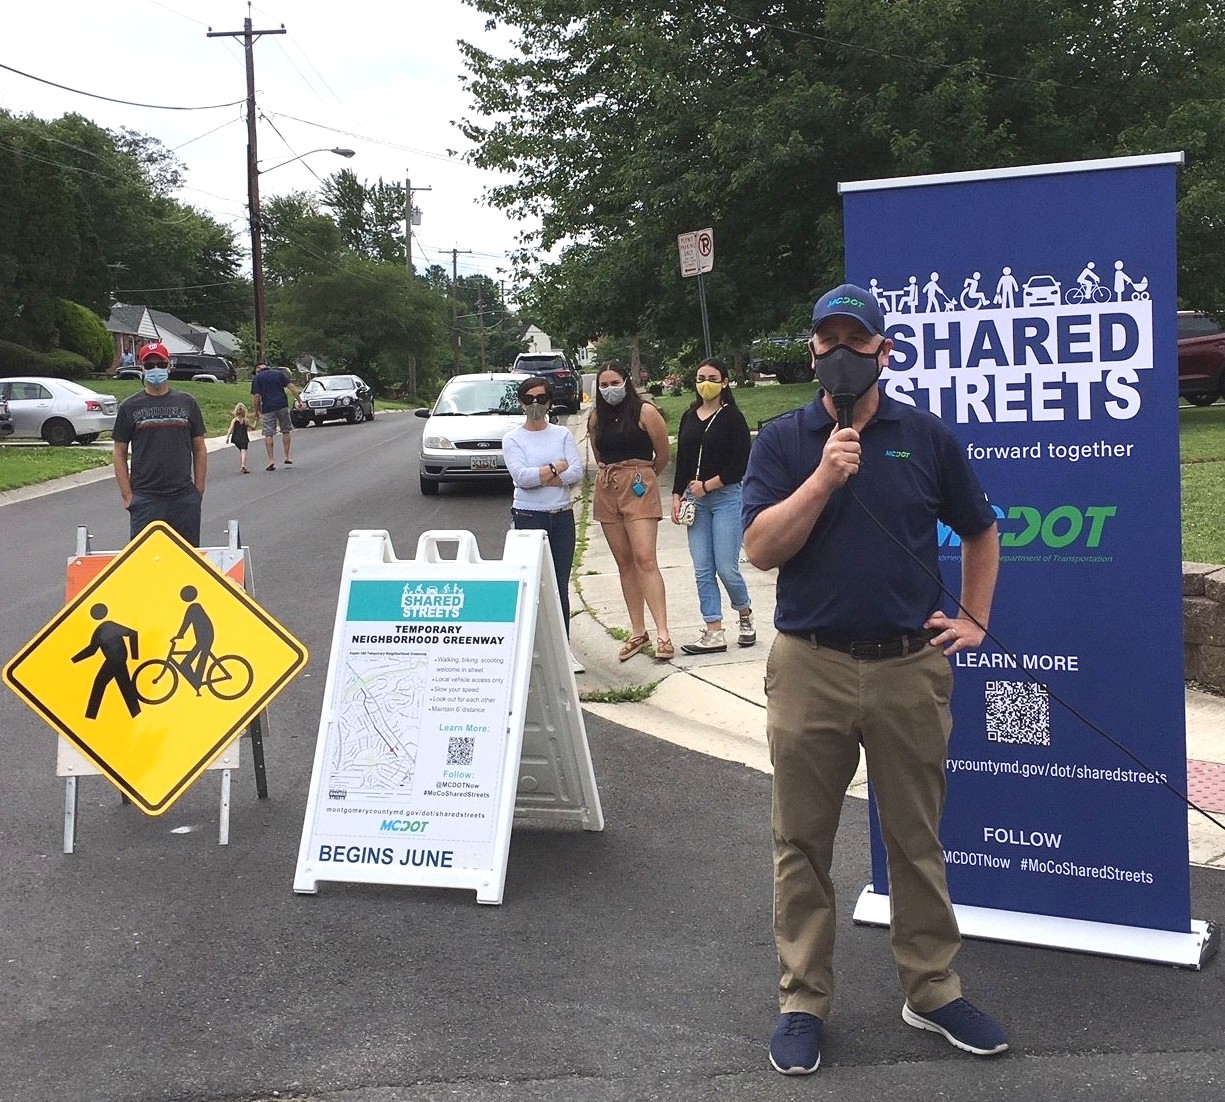 Chris Conklin, MCDOT Director, at MCDOT's Shared Streets intitiative